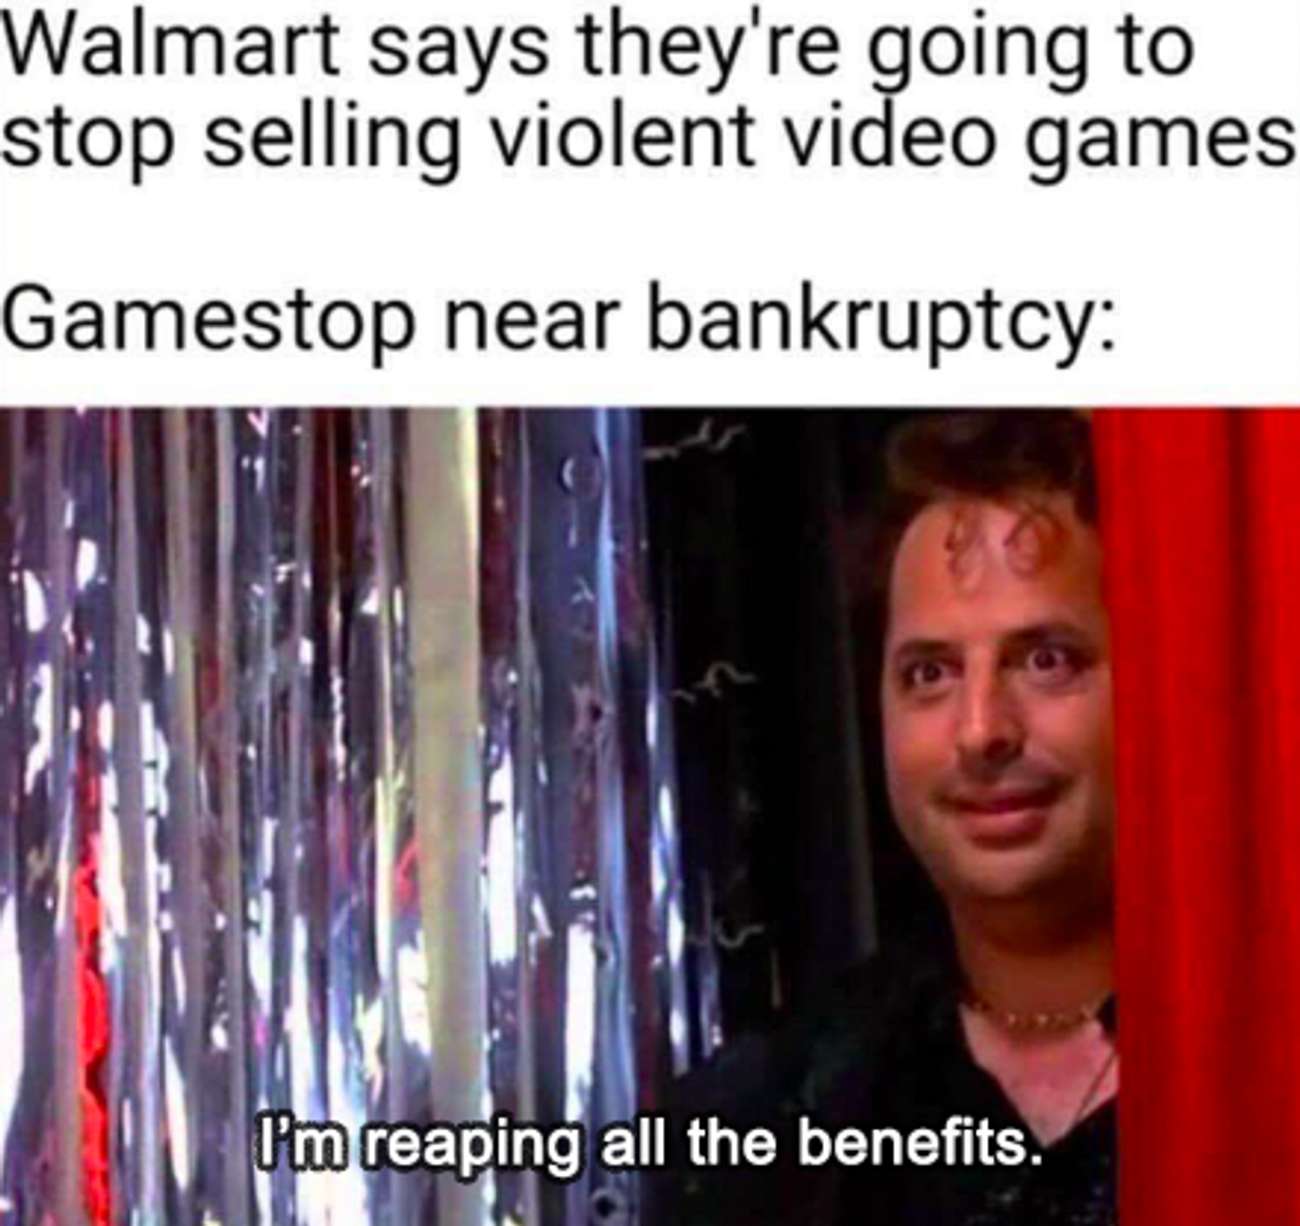 walmart gamestop meme - Walmart says they're going to stop selling violent video games Gamestop near bankruptcy I'm reaping all the benefits.